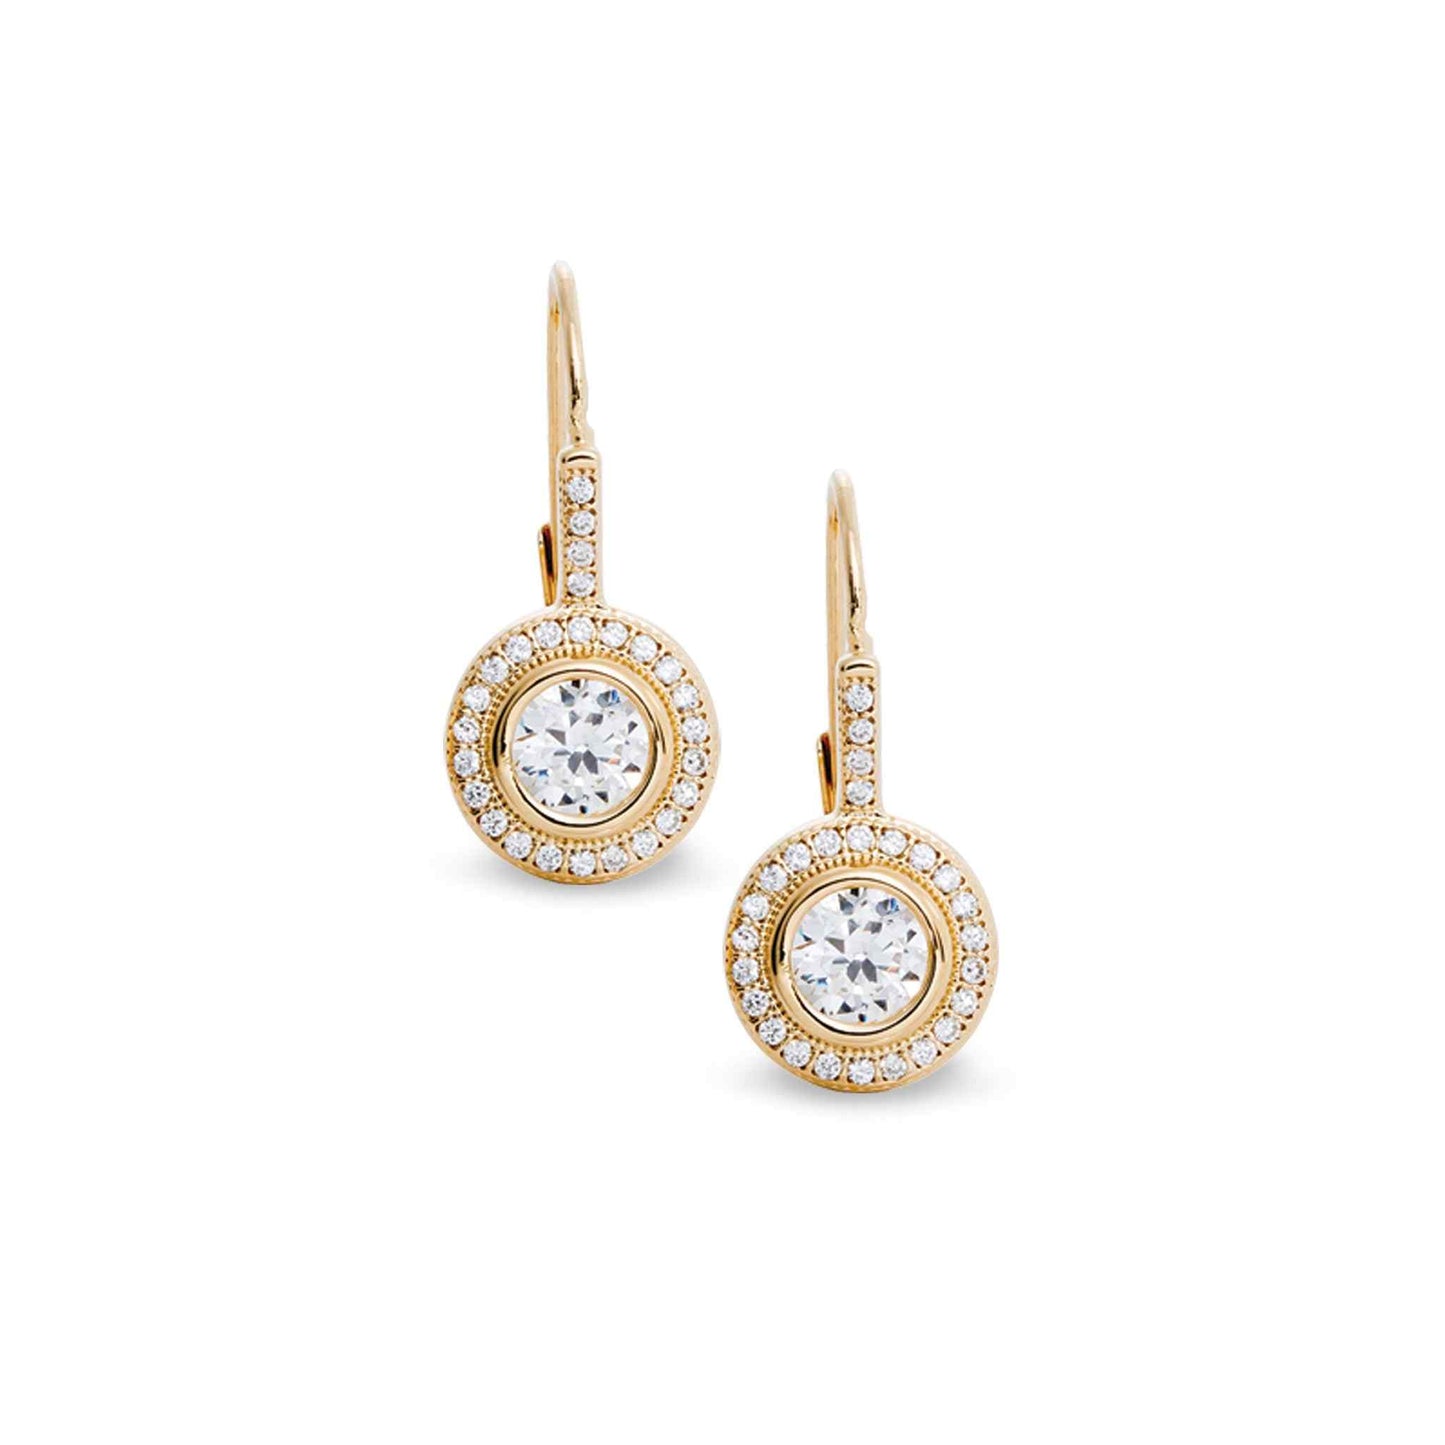 A round earrings with 27 simulated diamonds displayed on a neutral white background.